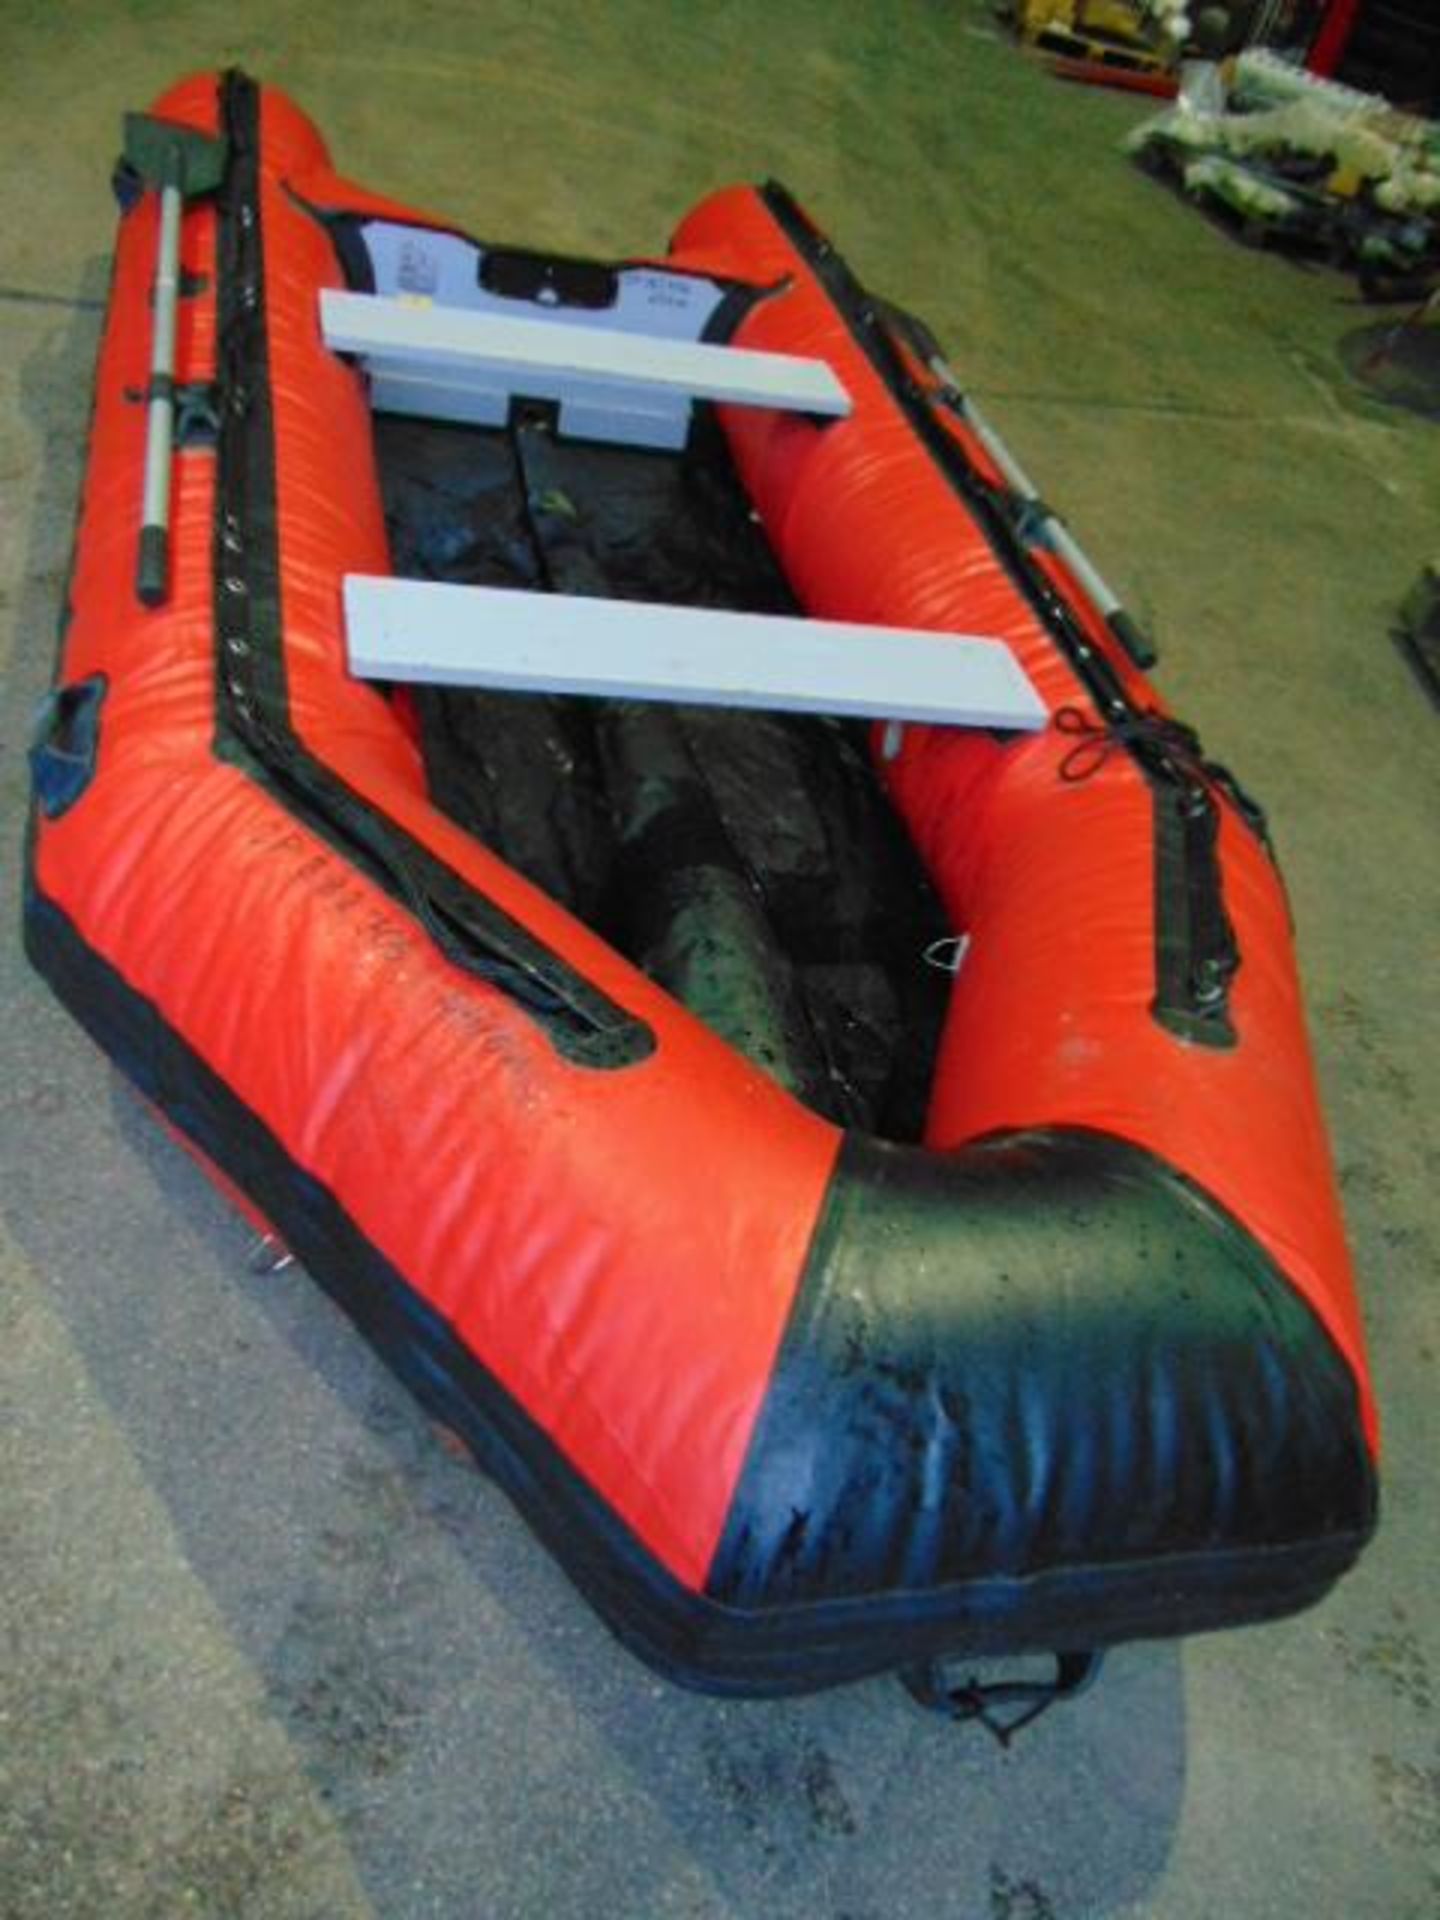 Inflatable Flood Rescue Boat